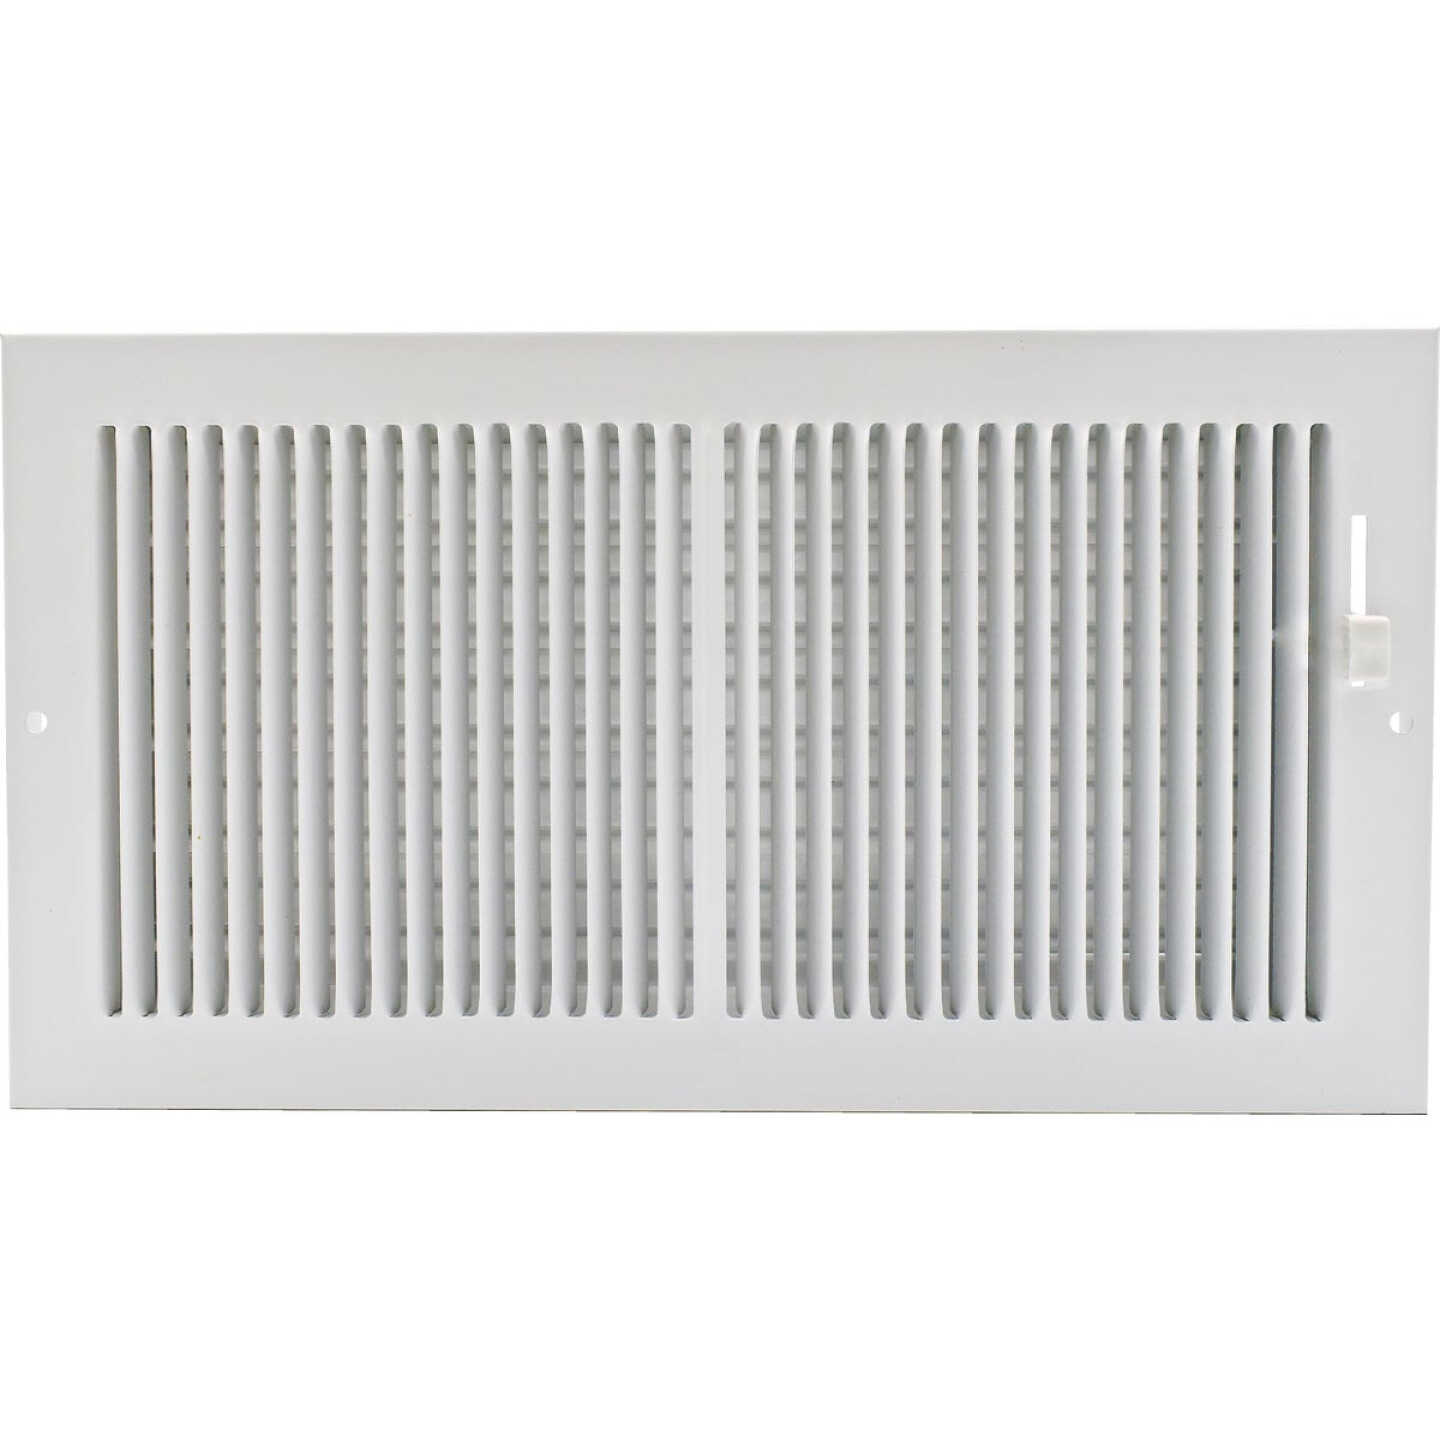 Ameriflow 12 In. x 6 In. White Wall Register Image 1